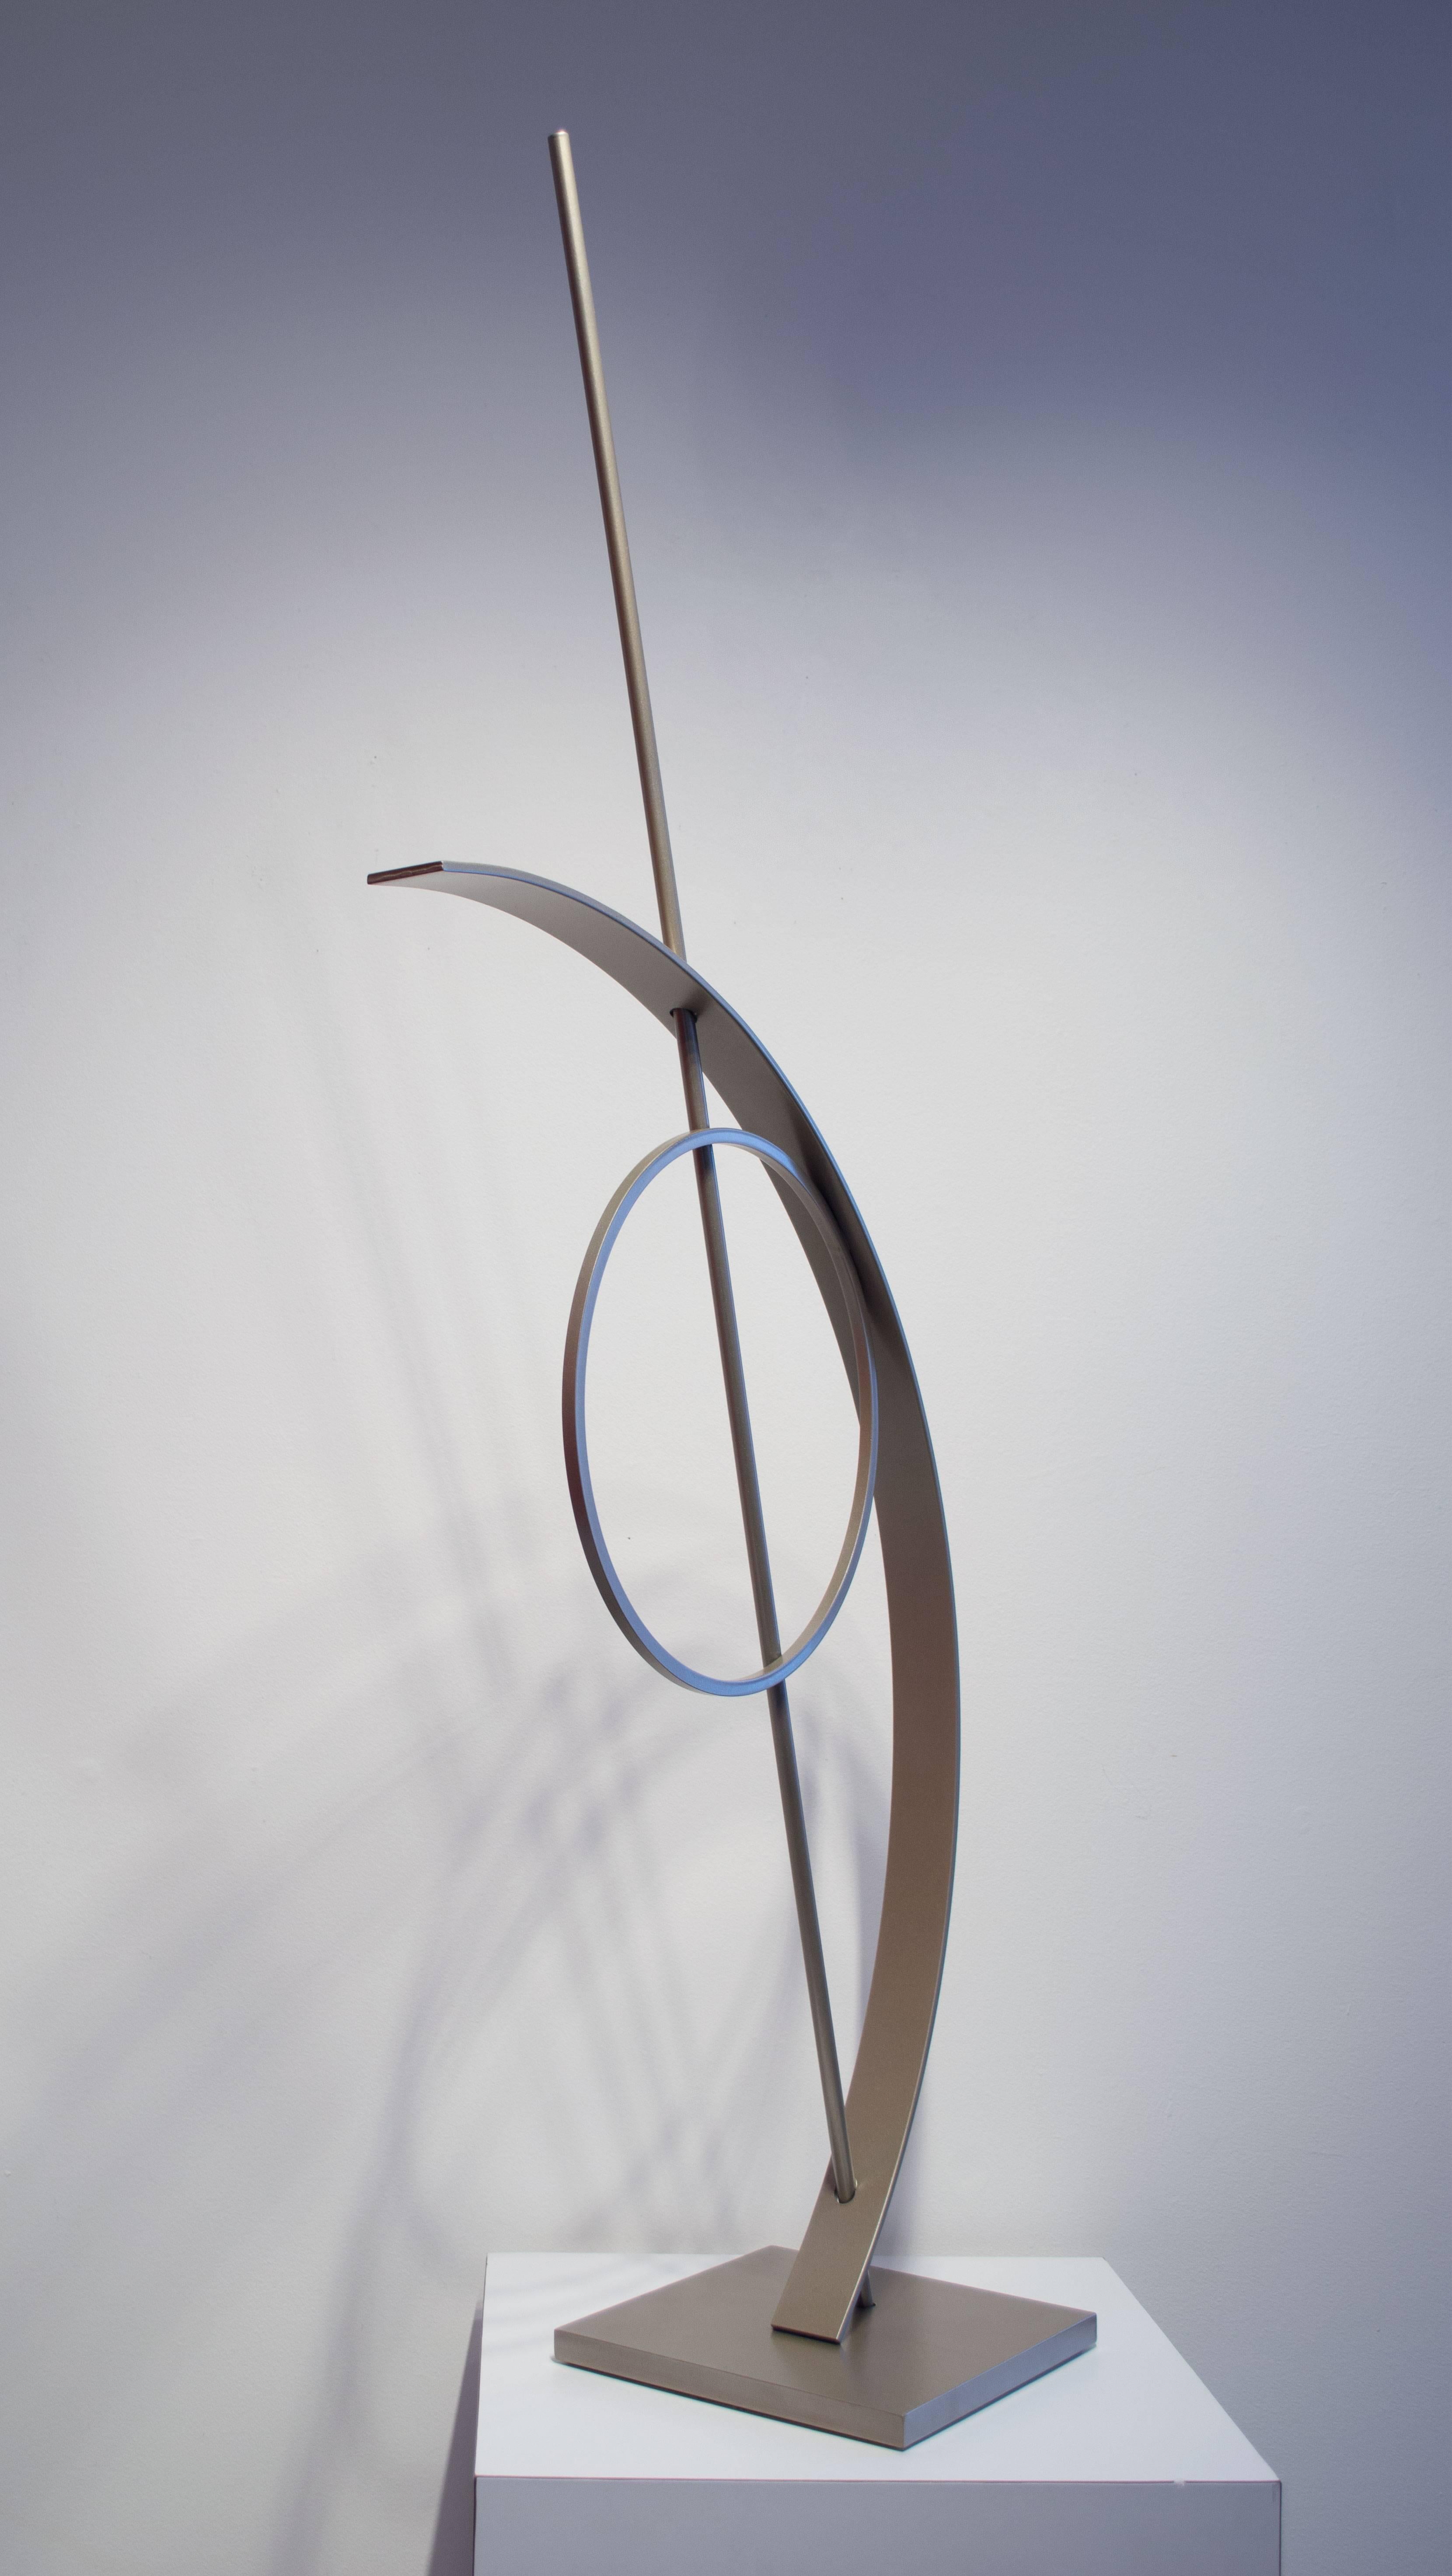 Michael Freed and Adam Rosen Abstract Sculpture - Tangent